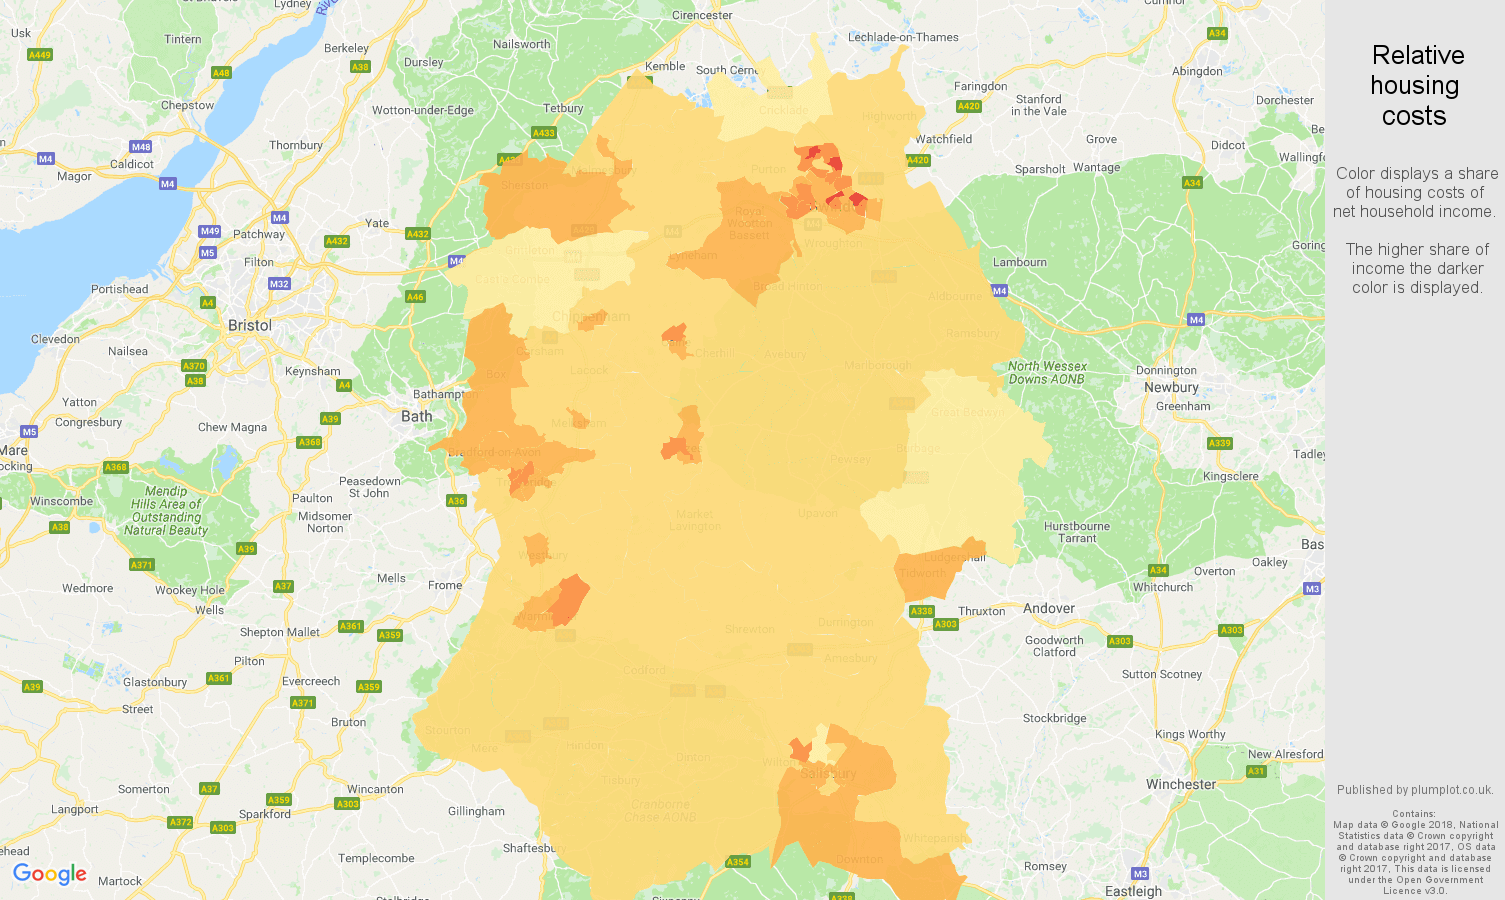 Wiltshire relative housing costs map